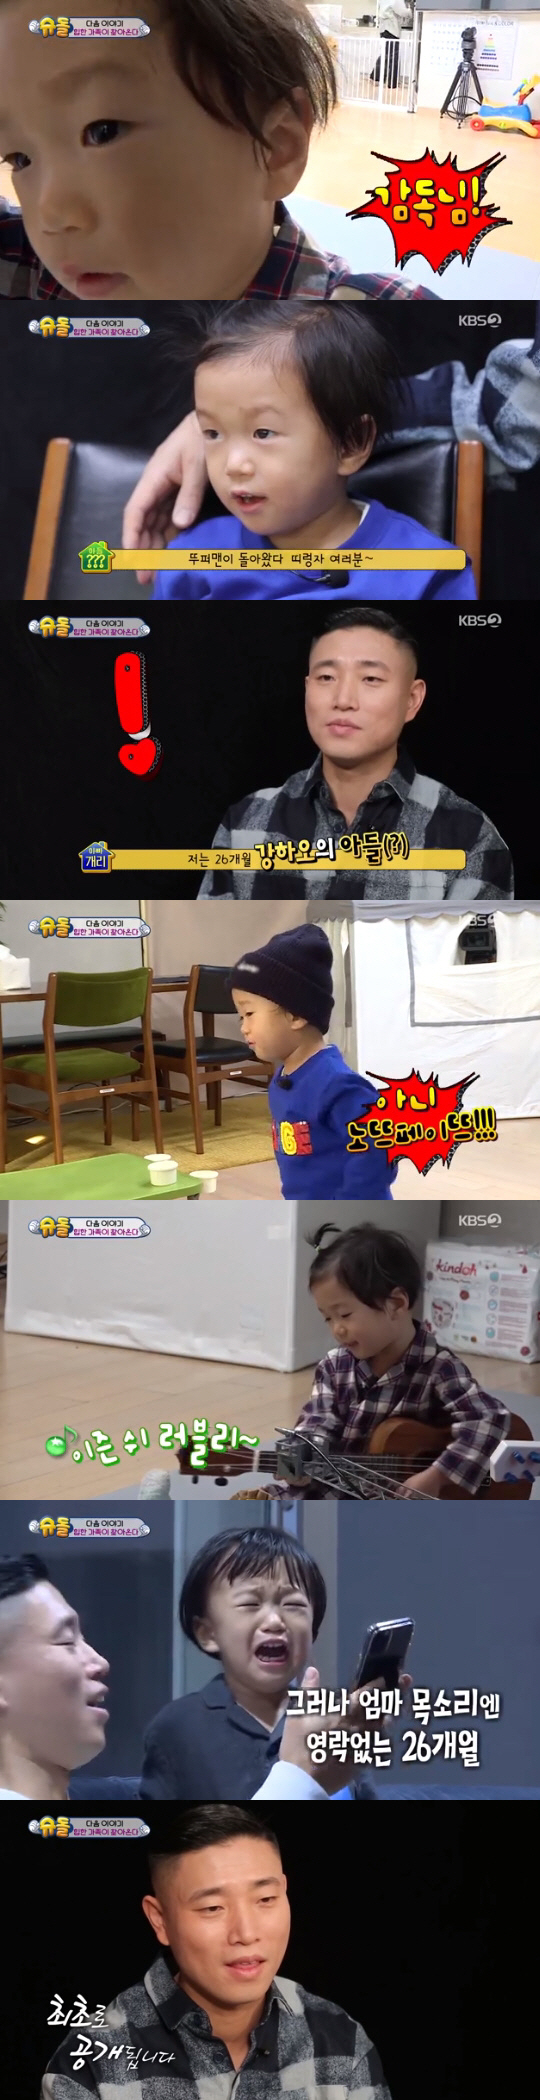 Lee Ssang Gary has joined the new family of KBS2s The The Return of Supermanhereinafter referred to as The Return of Superman).Gary first said his first greeting with 26 months son Hao on The Return of Superman broadcast on 27th, with Hao saying, Kevietto! Father wake up.The Return of Superman family, he said. Hao looked at the camera holder and said, What is this? Is it a cradle?I was surprised to show off all the affinity and vocabulary of the past.The Return of Superman viewers Hello.I am Kang Hao, and when asked about the name of Father, he showed a brilliant answer to Kang Hee-gun .Here, he showed a cute charm and musical talent that resembles Father, and foresaw the appearance of a baby of the past.The announcement of the appearance of these rich people was 12.6% per minute (Nilson Korea), marking the best minute of The Return of Superman.I think its been over three years, Ive been a bit out of everything, Ive been thinking a lot about (the appearance), Gary said.But the way he looks at Garys appearance in The Return of Superman is not as fine: the child is cute and lovely, but public opinion about Gary is not so good.He will also do that, Gary got off at SBS Running Man in 2016 and then announced the surprise marriage news on SNS in April 2017.But there was a noise in the process.It was pointed out that even the members of Running Man who have been together for many years as well as the Lee family member have reported Garys marriage news to SNS.At that time, Running Man also indirectly expressed regret that Gary changed his phone number and could not contact him at present.Gary, who left the broadcast and colleagues, announced the news of his birth on SNS in six months of marriage.And she told YouTube in 2018 that she has been a celebrity for 20 years and has been on the air to heal her under extreme stress.Gary, who had been doing so, was returning to the air with son this time, so the publics gaze on it could not be fixed.Attention is focused on whether Gary can overturn cold public opinion through The Return of Superman.